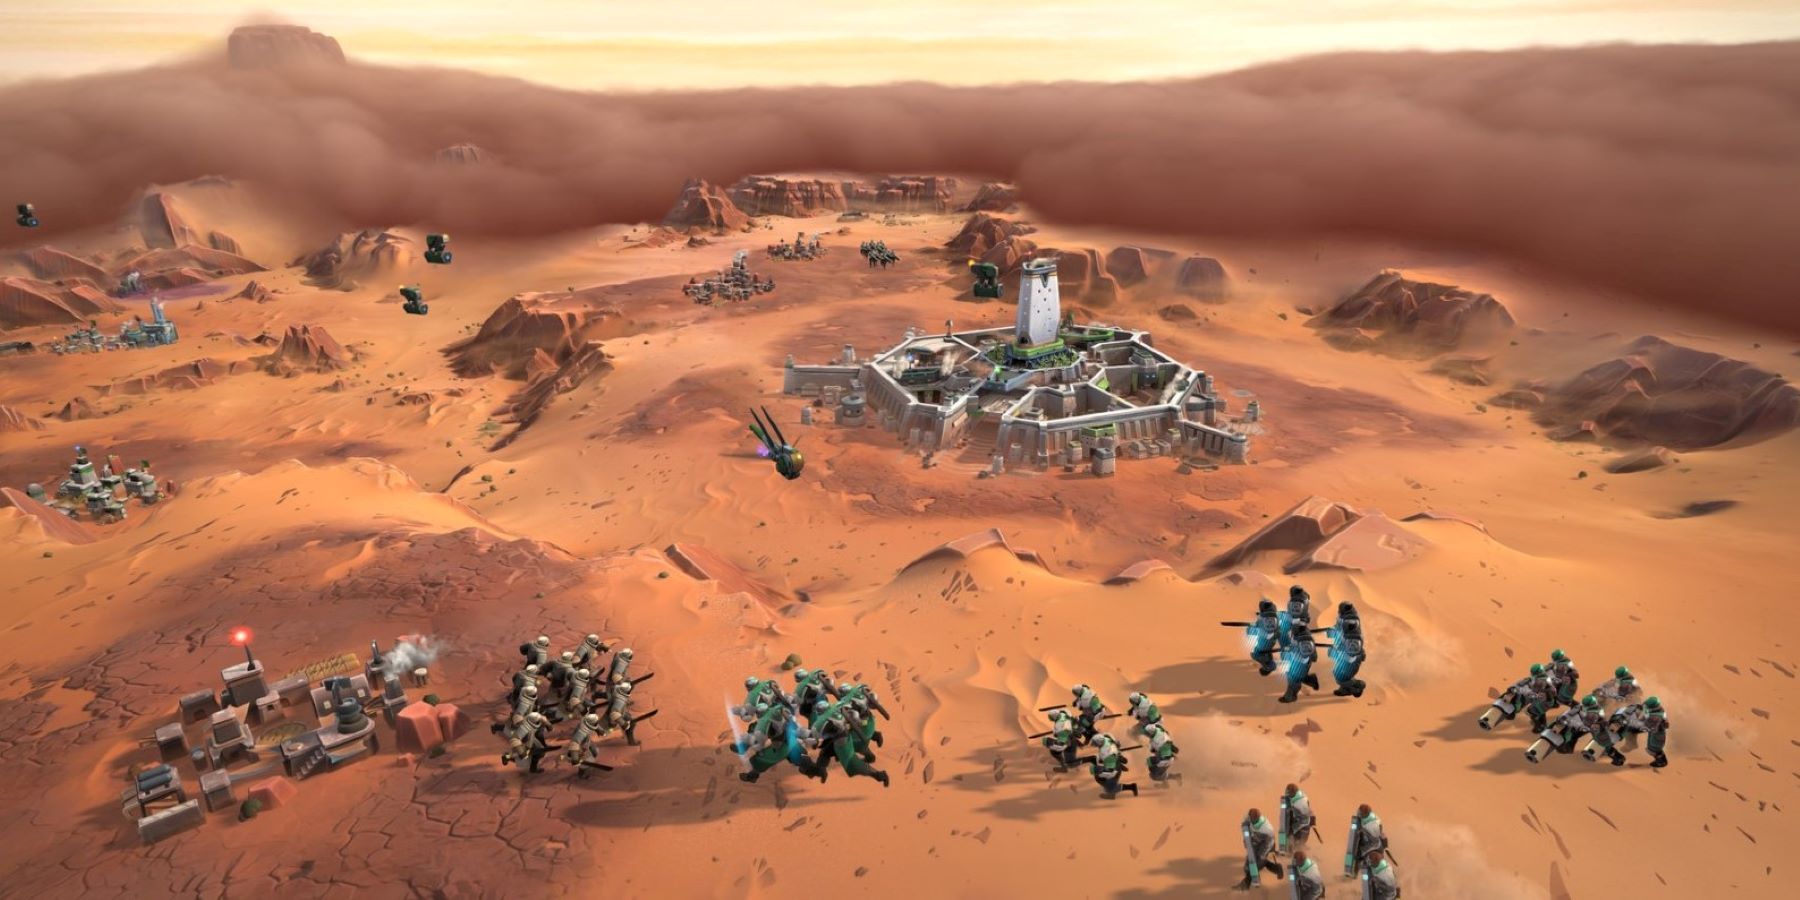 Soldiers advancing on a desert settlement in Dune: Spice Wars